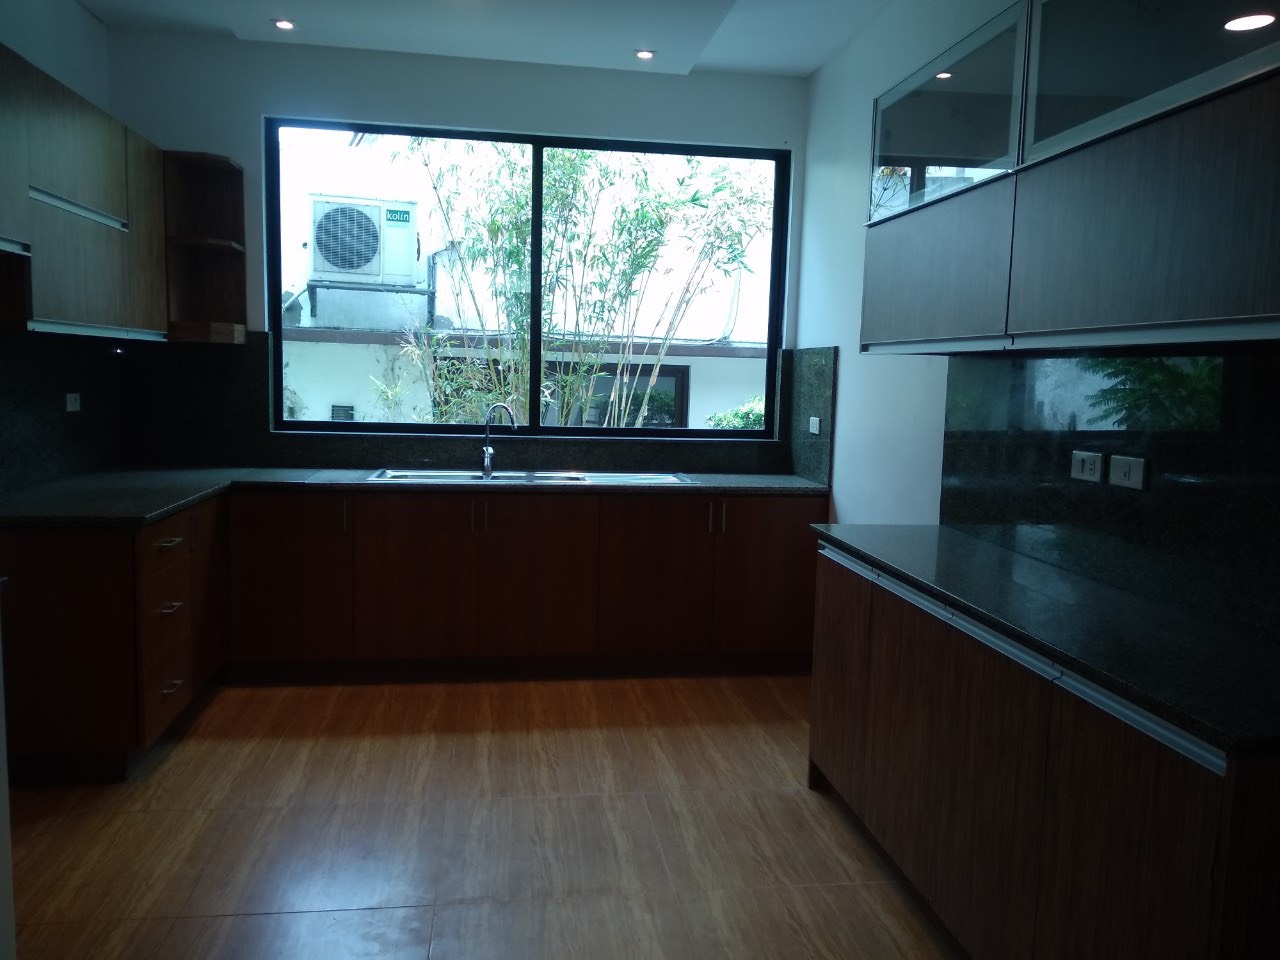 5 Bedrooms House For Rent, McKinley Hill Village 10